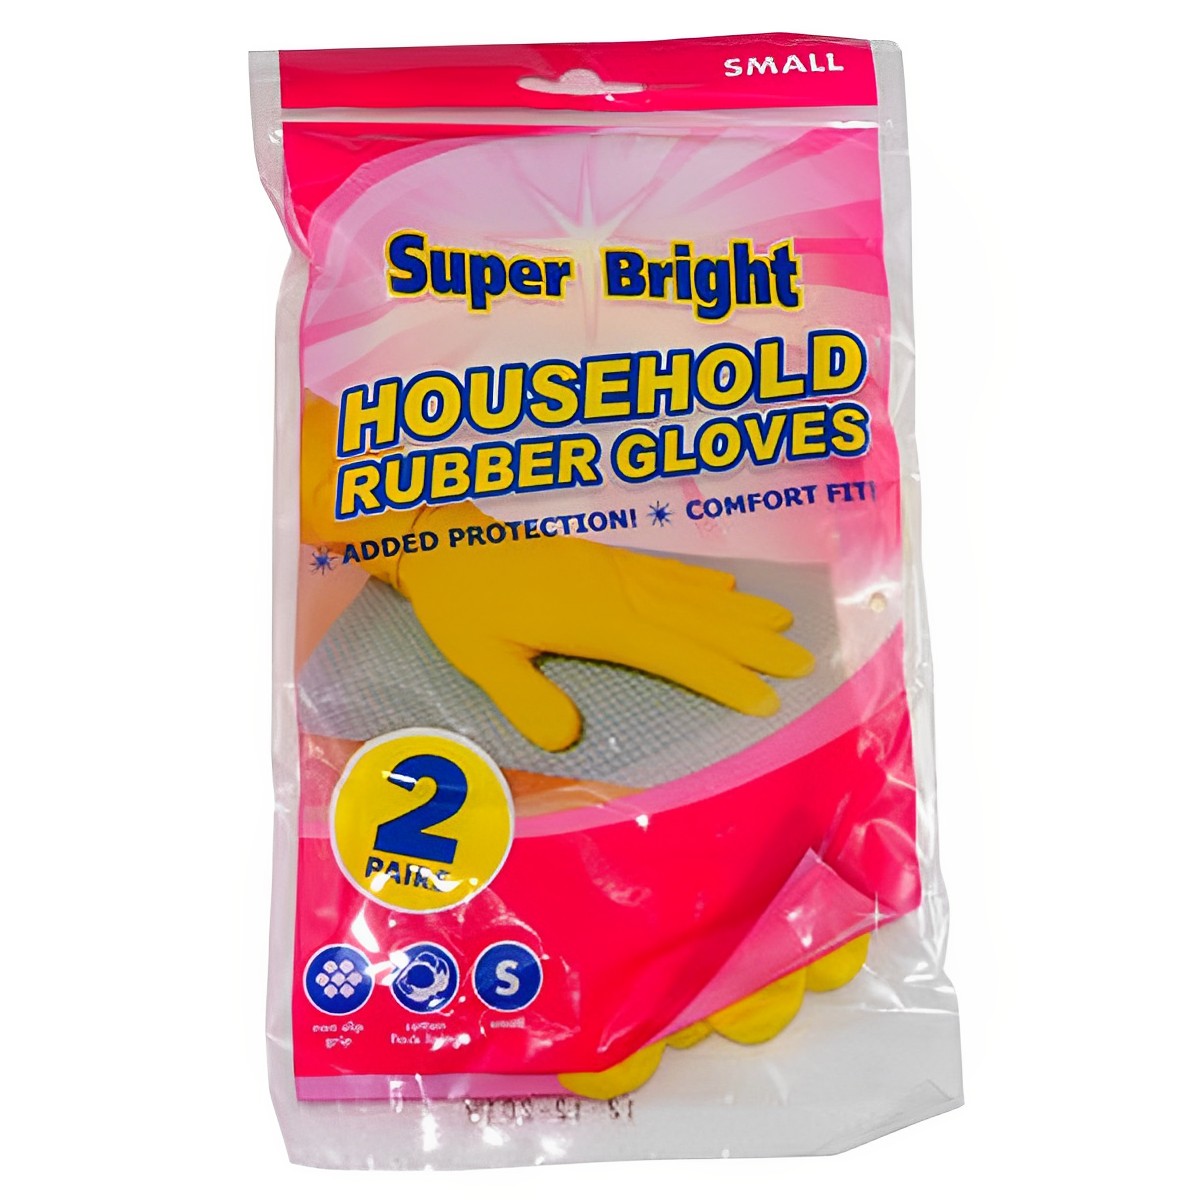 Super Bright - Rubber Gloves Small - 2 pairs - Continental Food Store